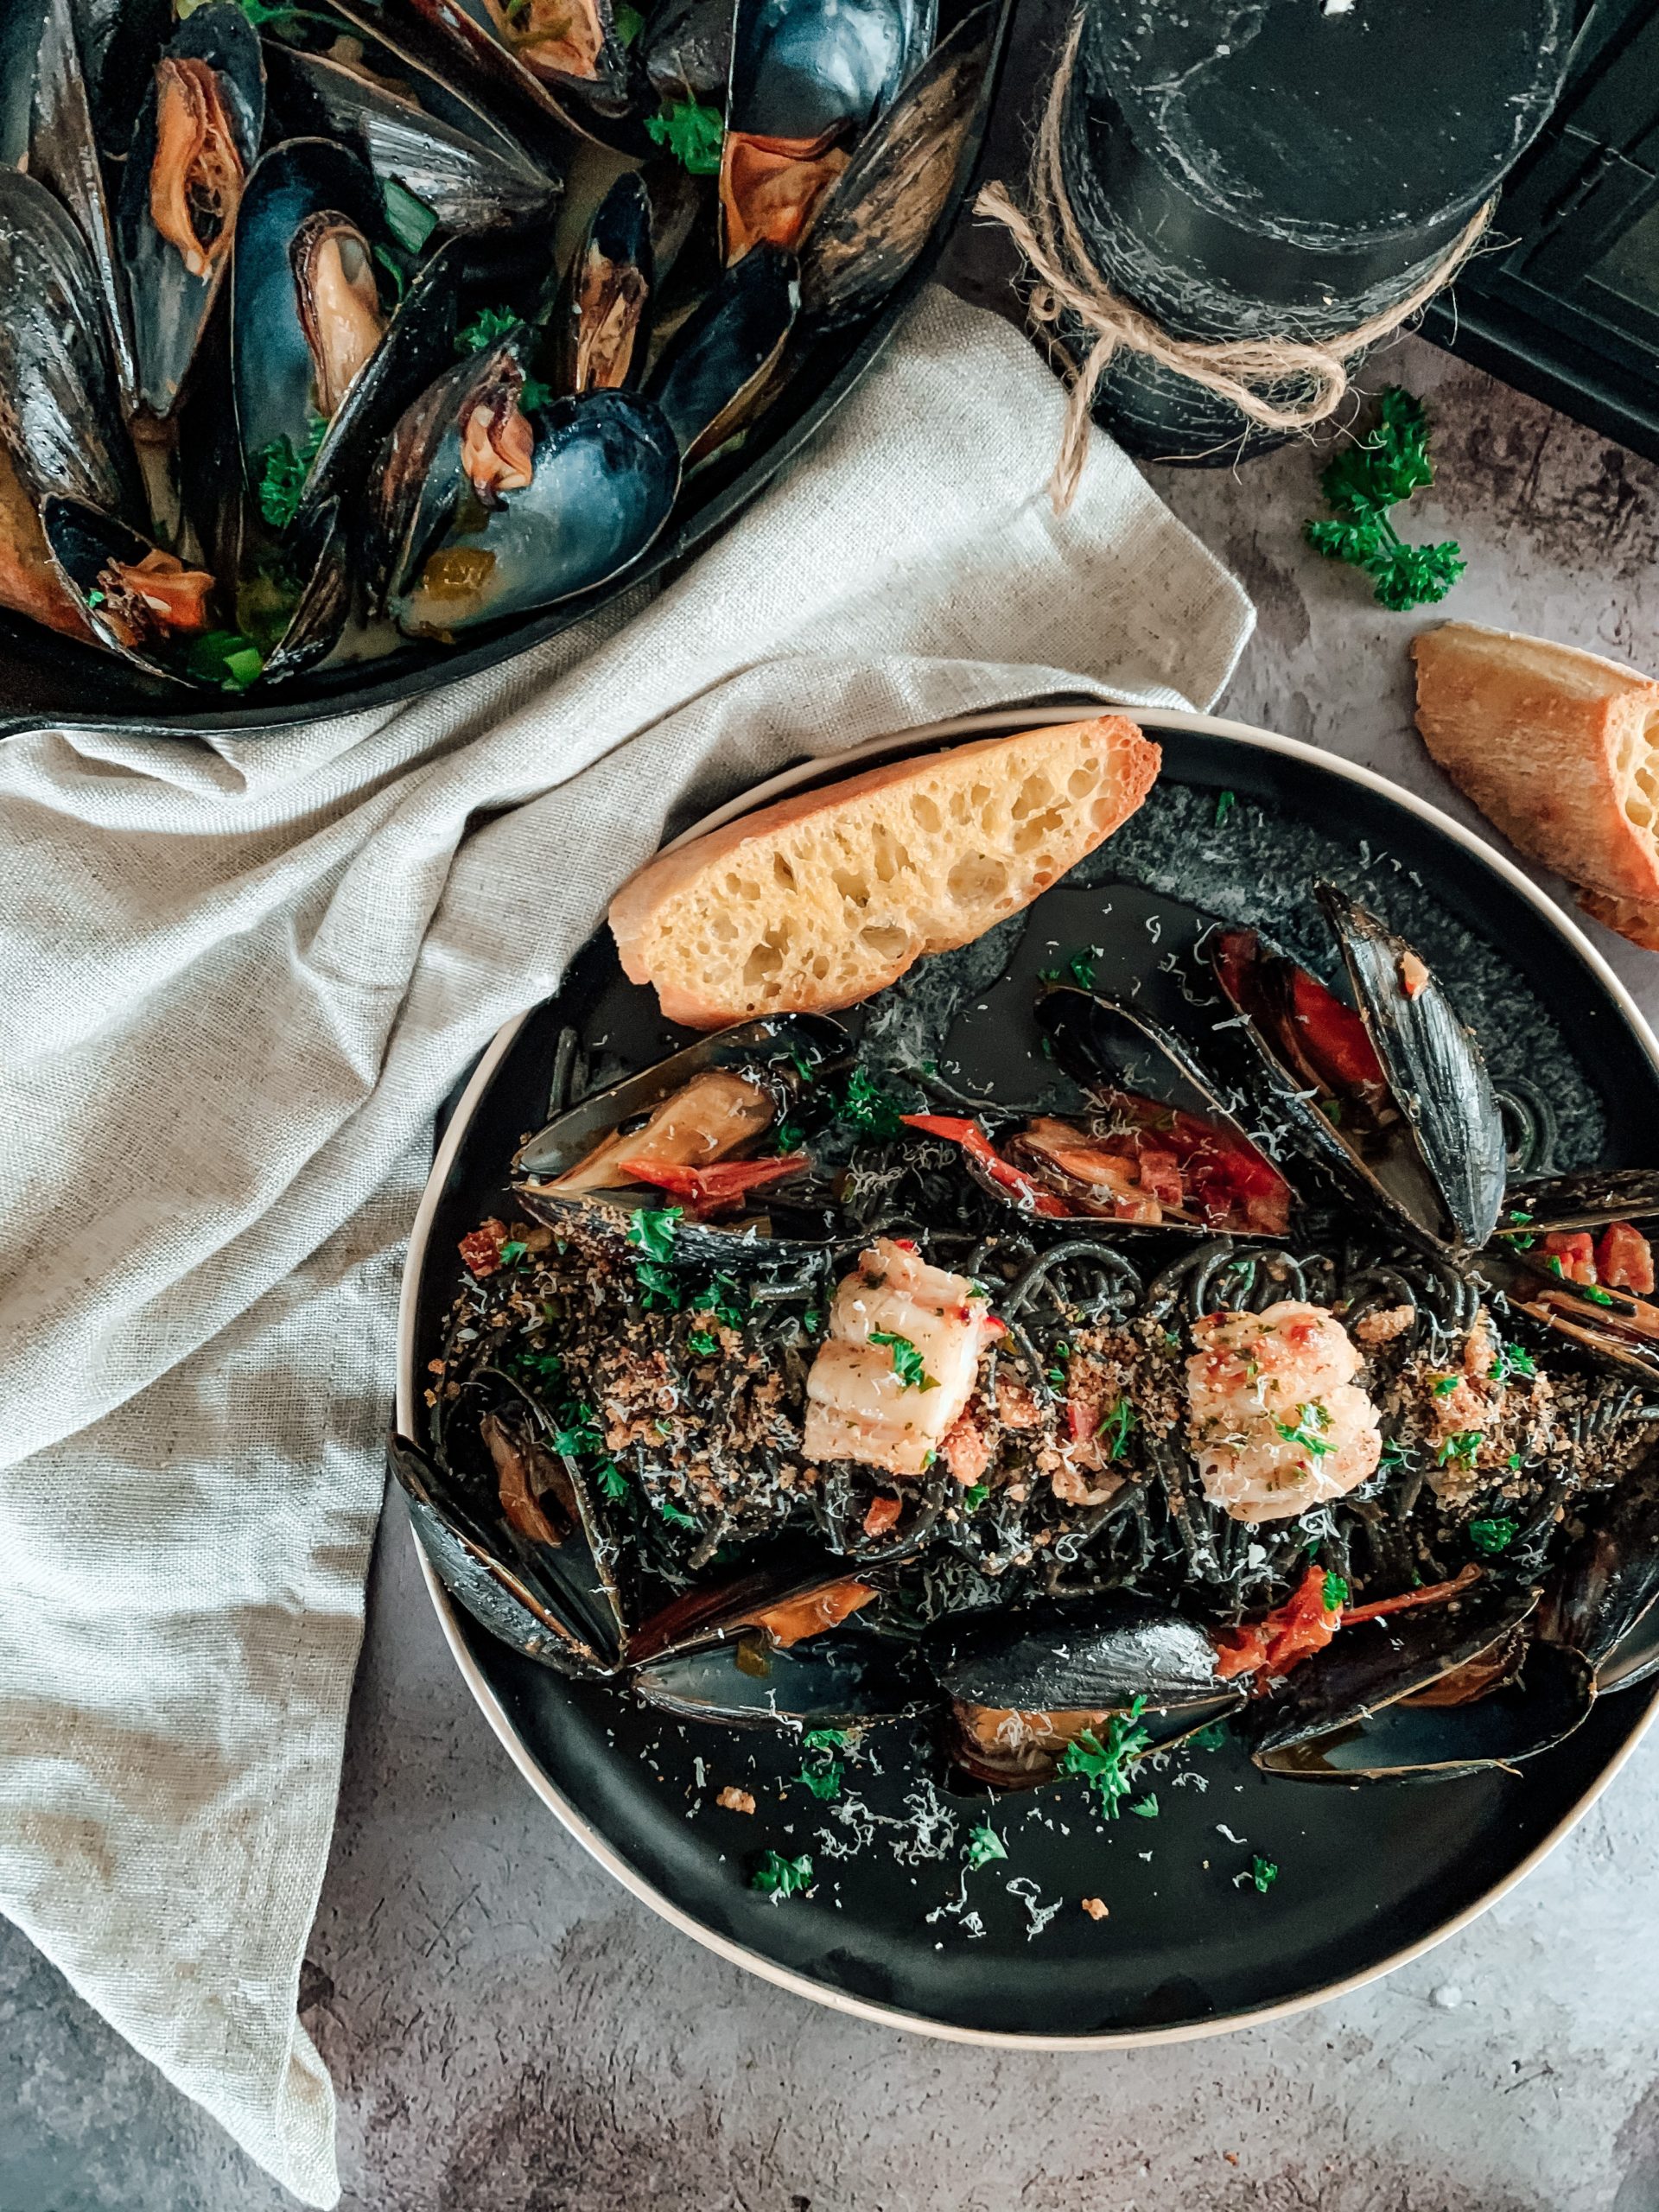 Squid Ink Pasta With Lobster Mussels In White Wine Thecommunalfeast Com